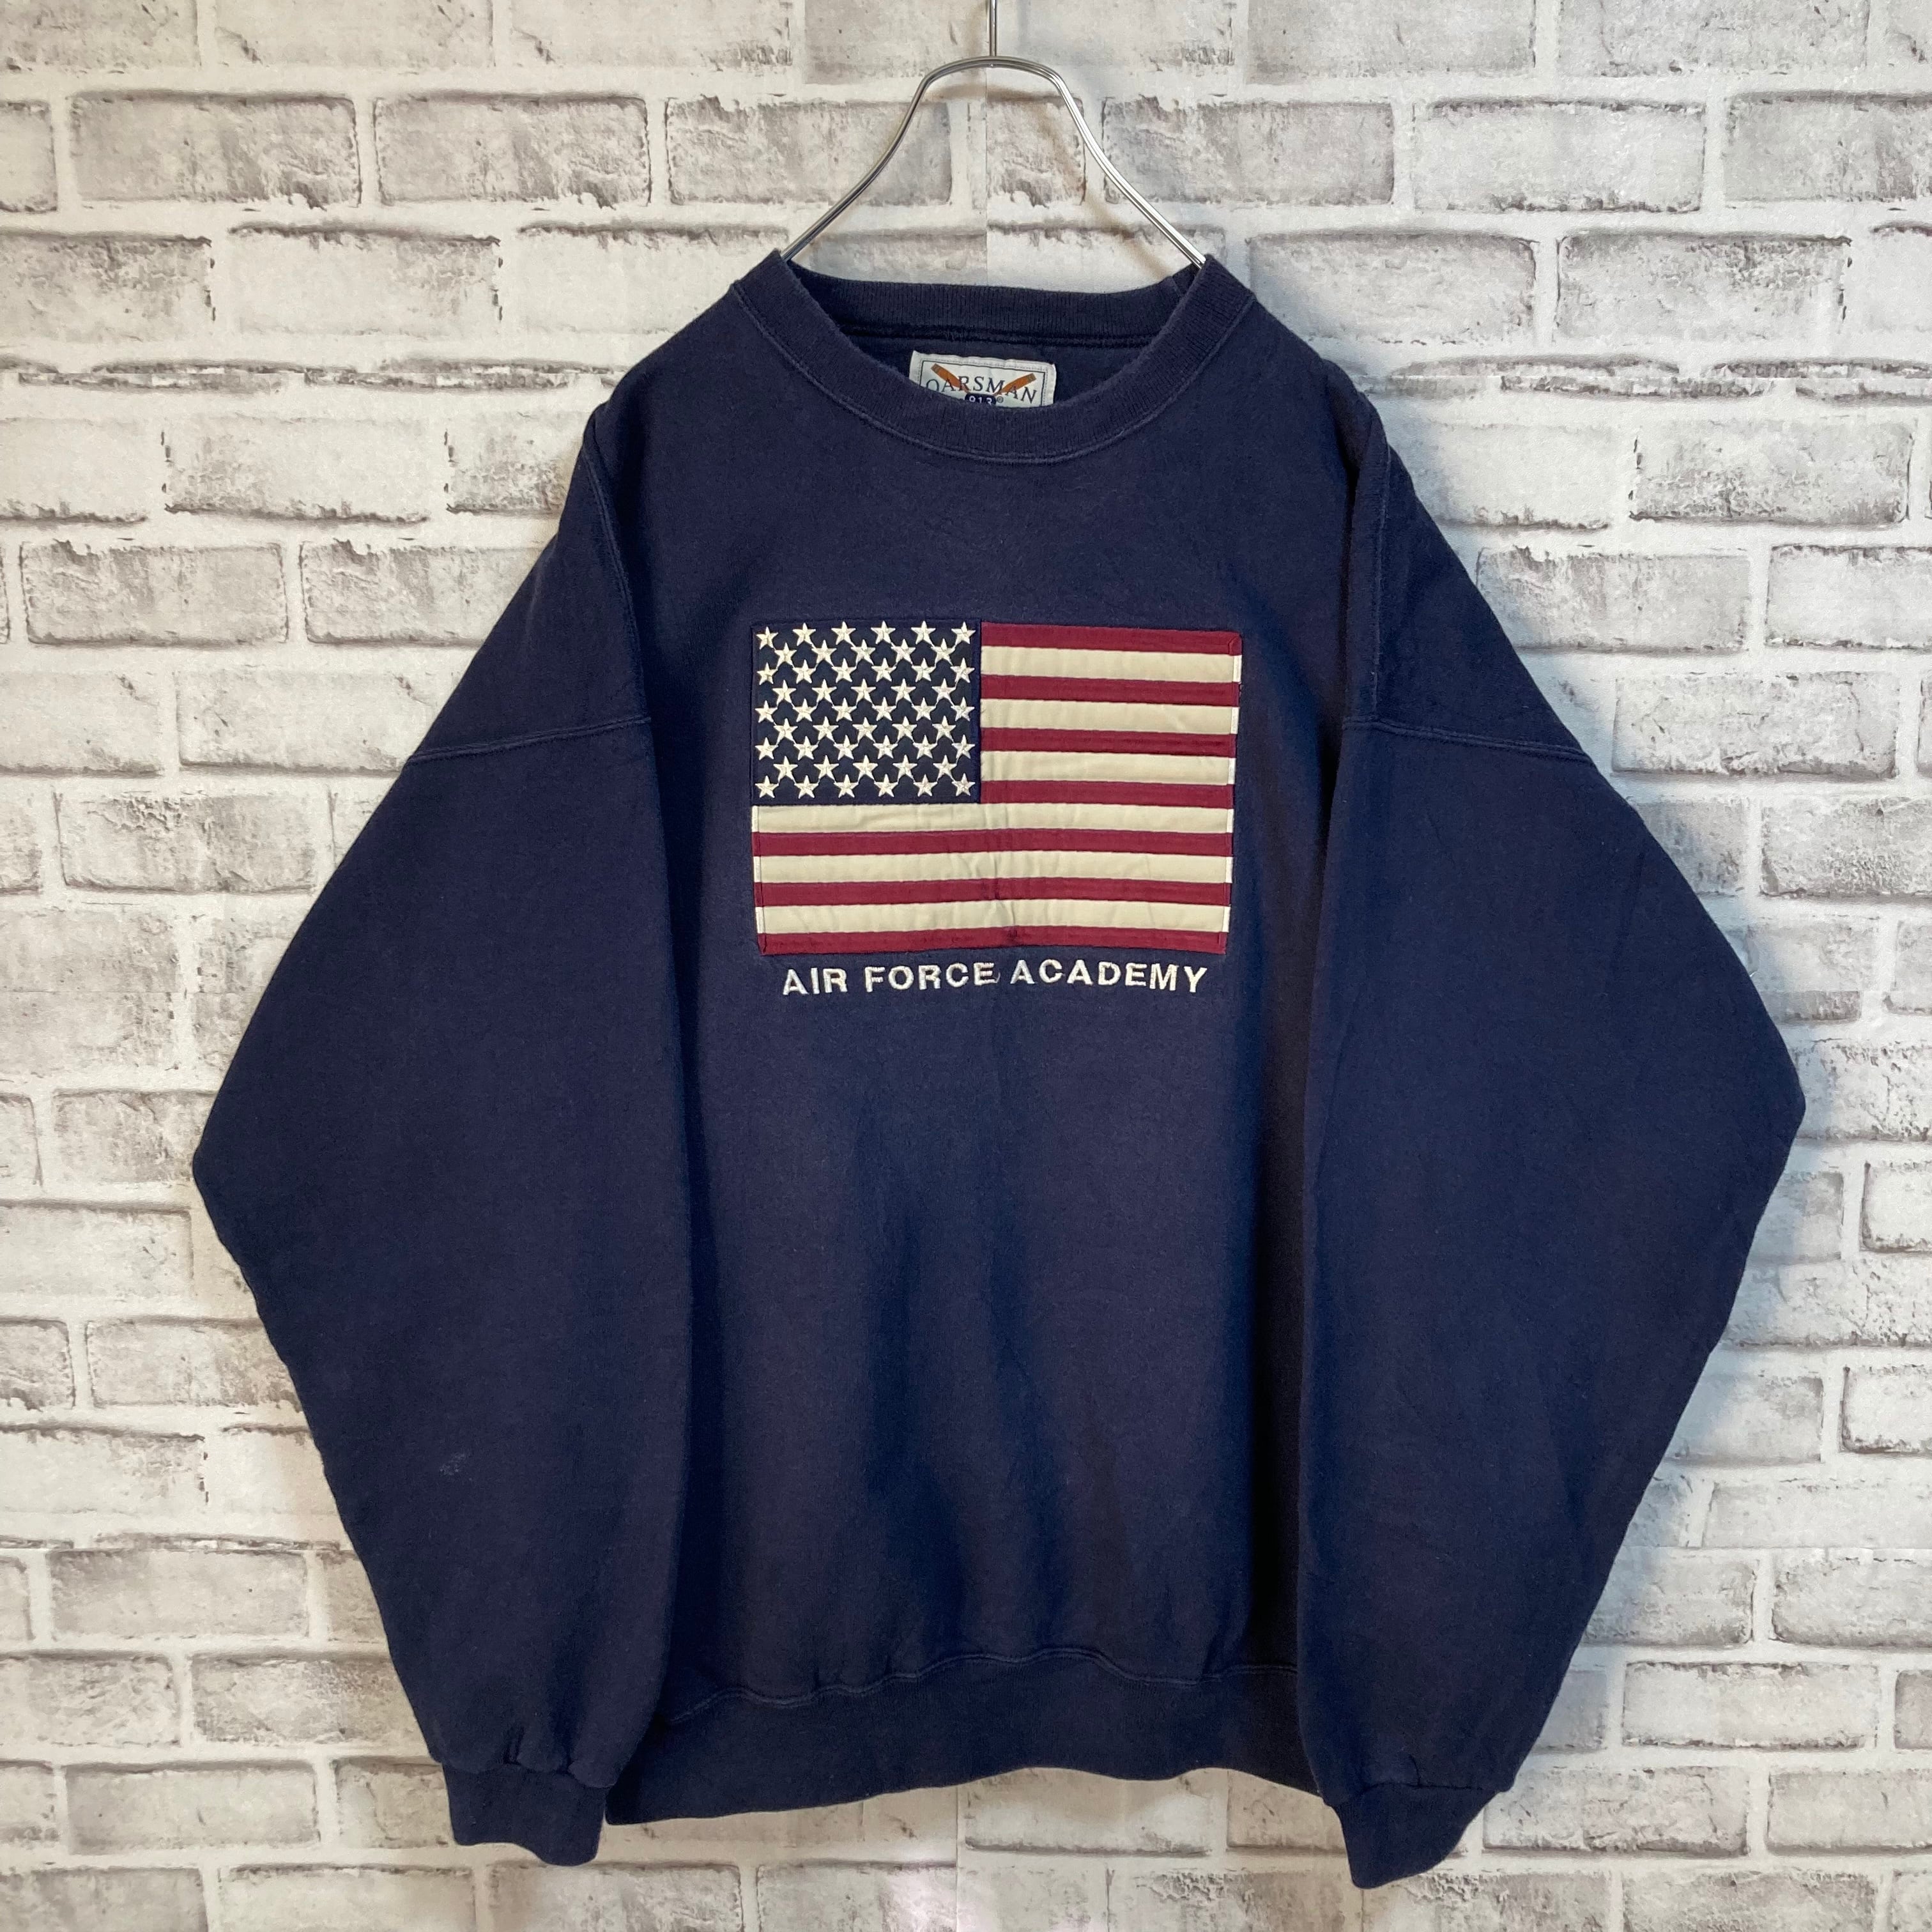 OARSMAN913】L/S Sweat XL Made in USA 90s ”AIR FORCE ACADEMY” USA ...